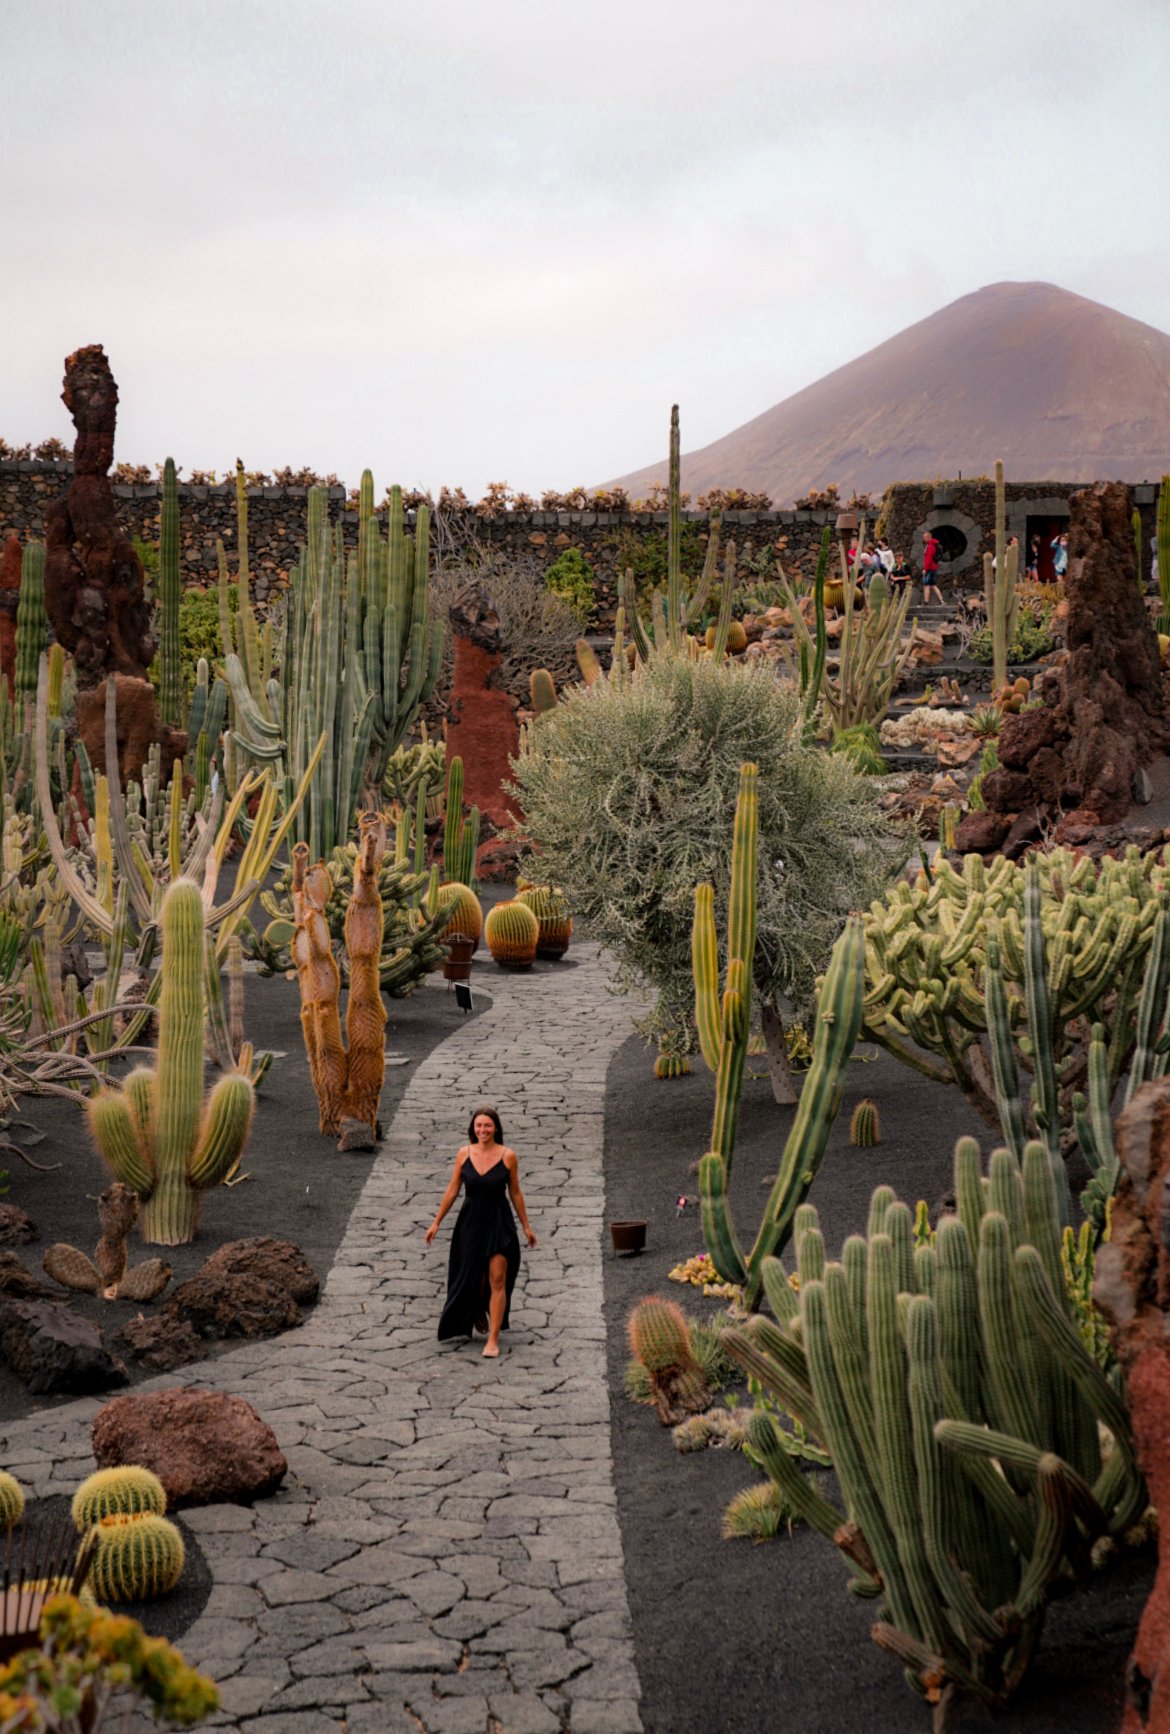 Cactus Garden, things to see in Lanzarote